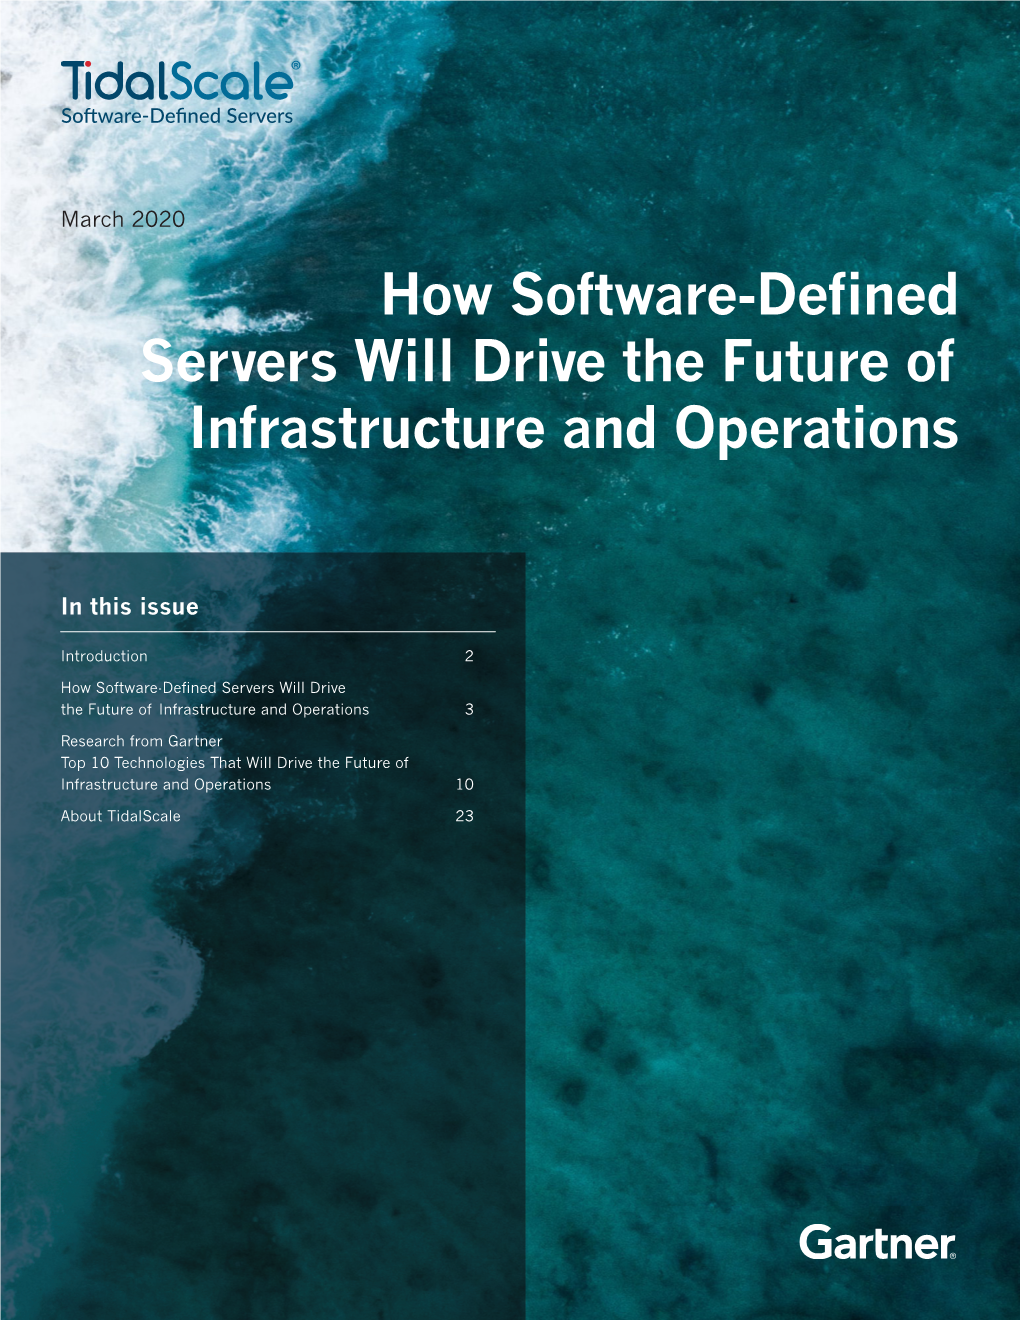 How Software-Defined Servers Will Drive the Future of Infrastructure and Operations